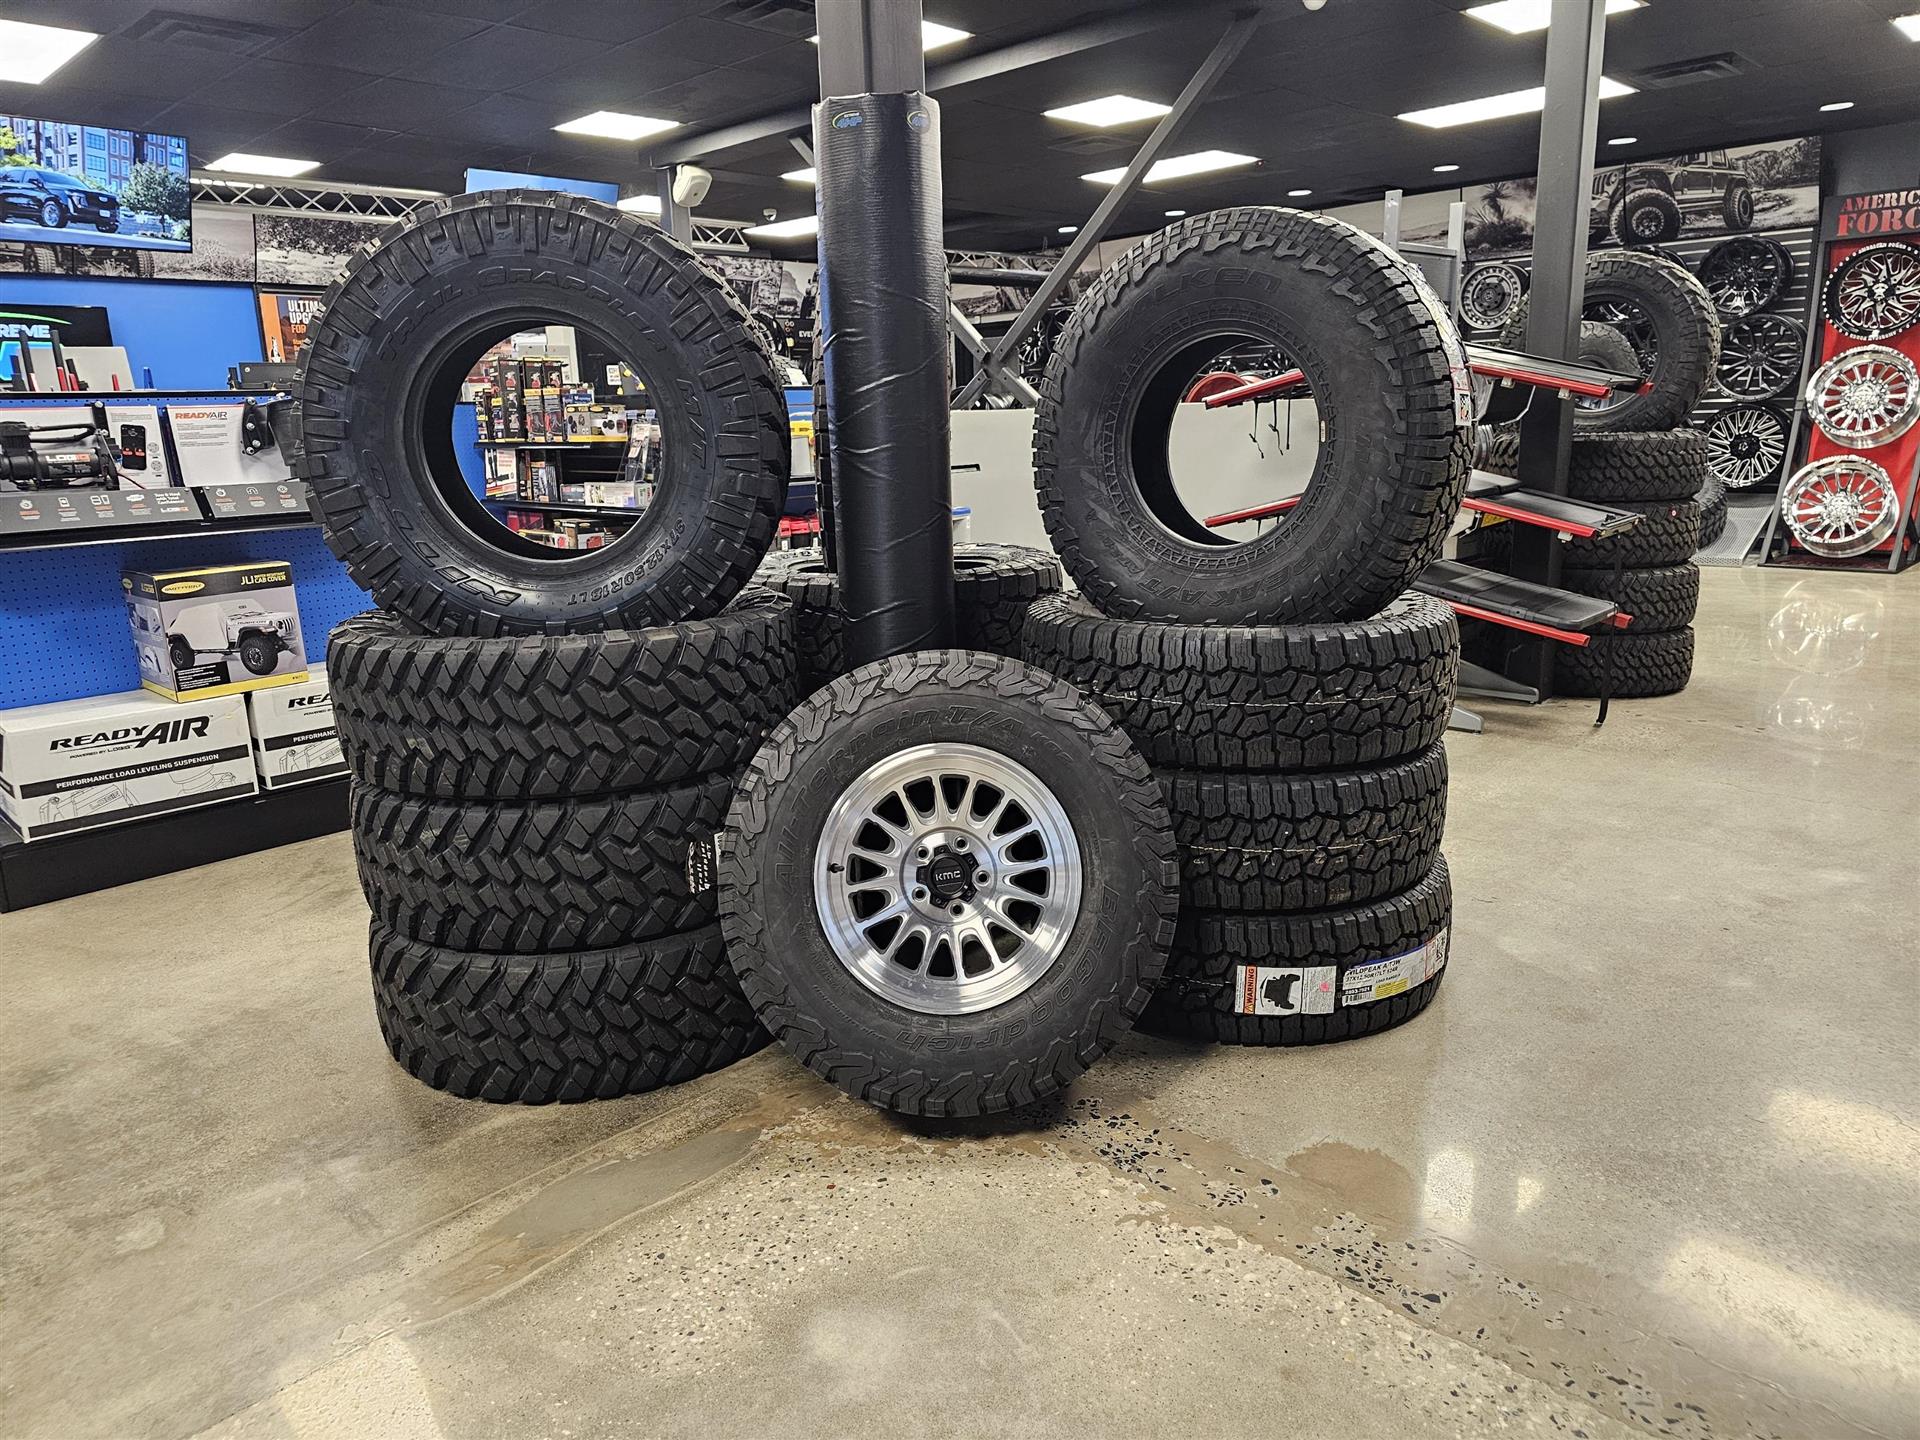 Stacks of tires inside Towson store